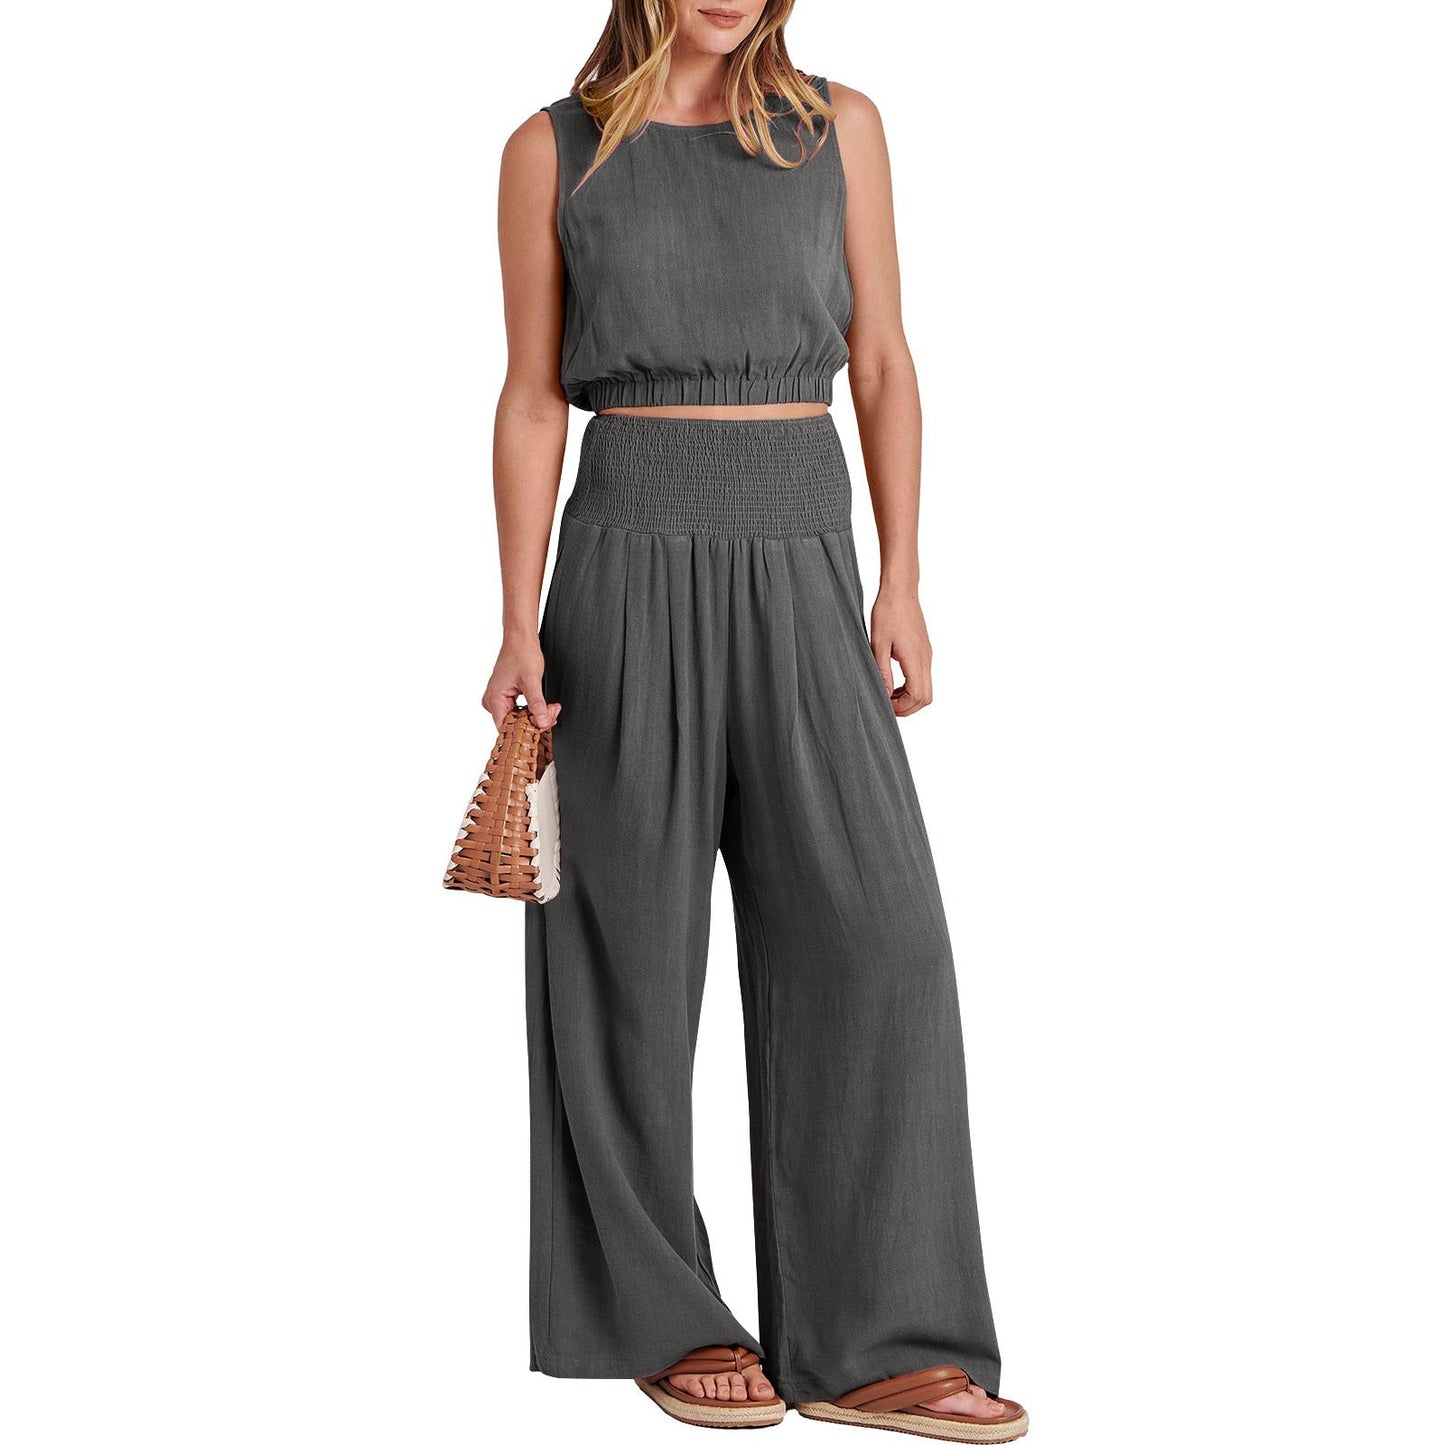 NTG Fad SUIT 898# Gray 66 / S Sleeveless Top and Pants Set